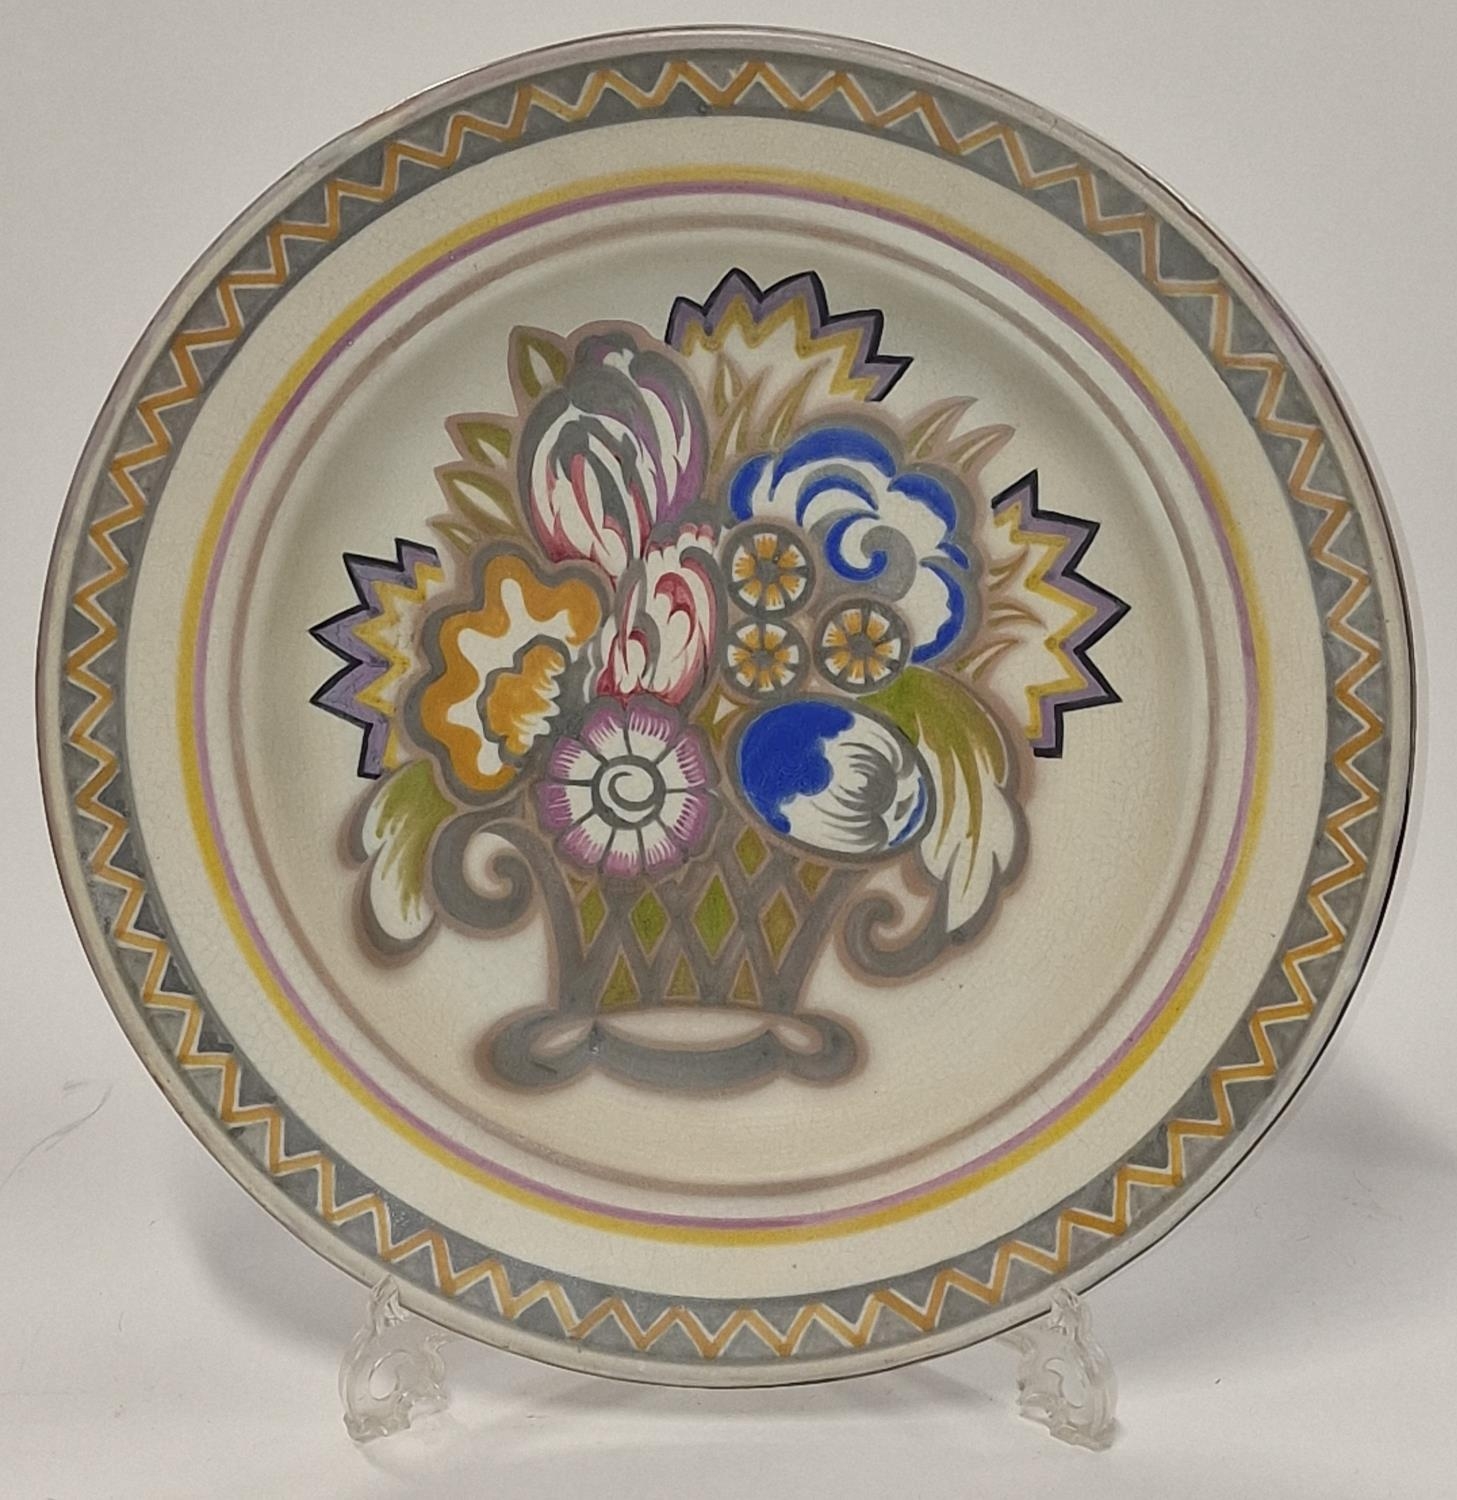 Poole Pottery Carter Stabler Adams shape 910 JC pattern larger charger possibly decorated by Anne